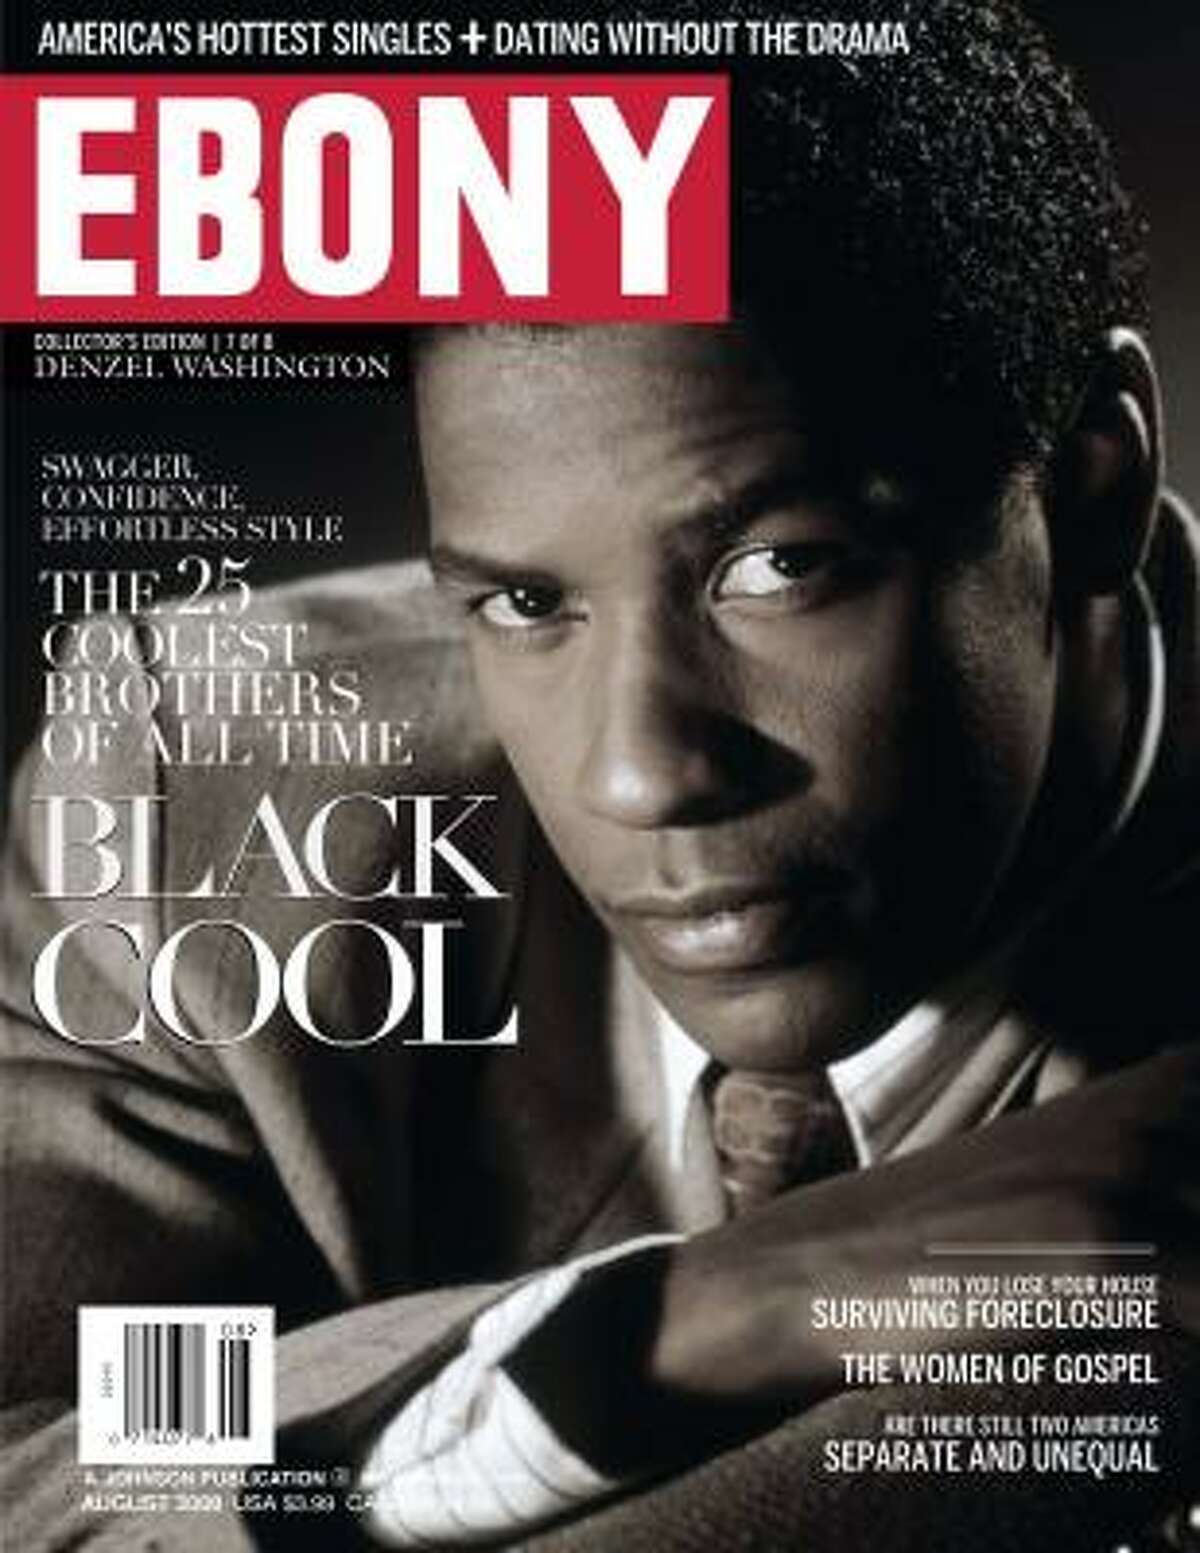 The magazine's female staffers tended to define cool as "sexy," as with Denzel Washington.